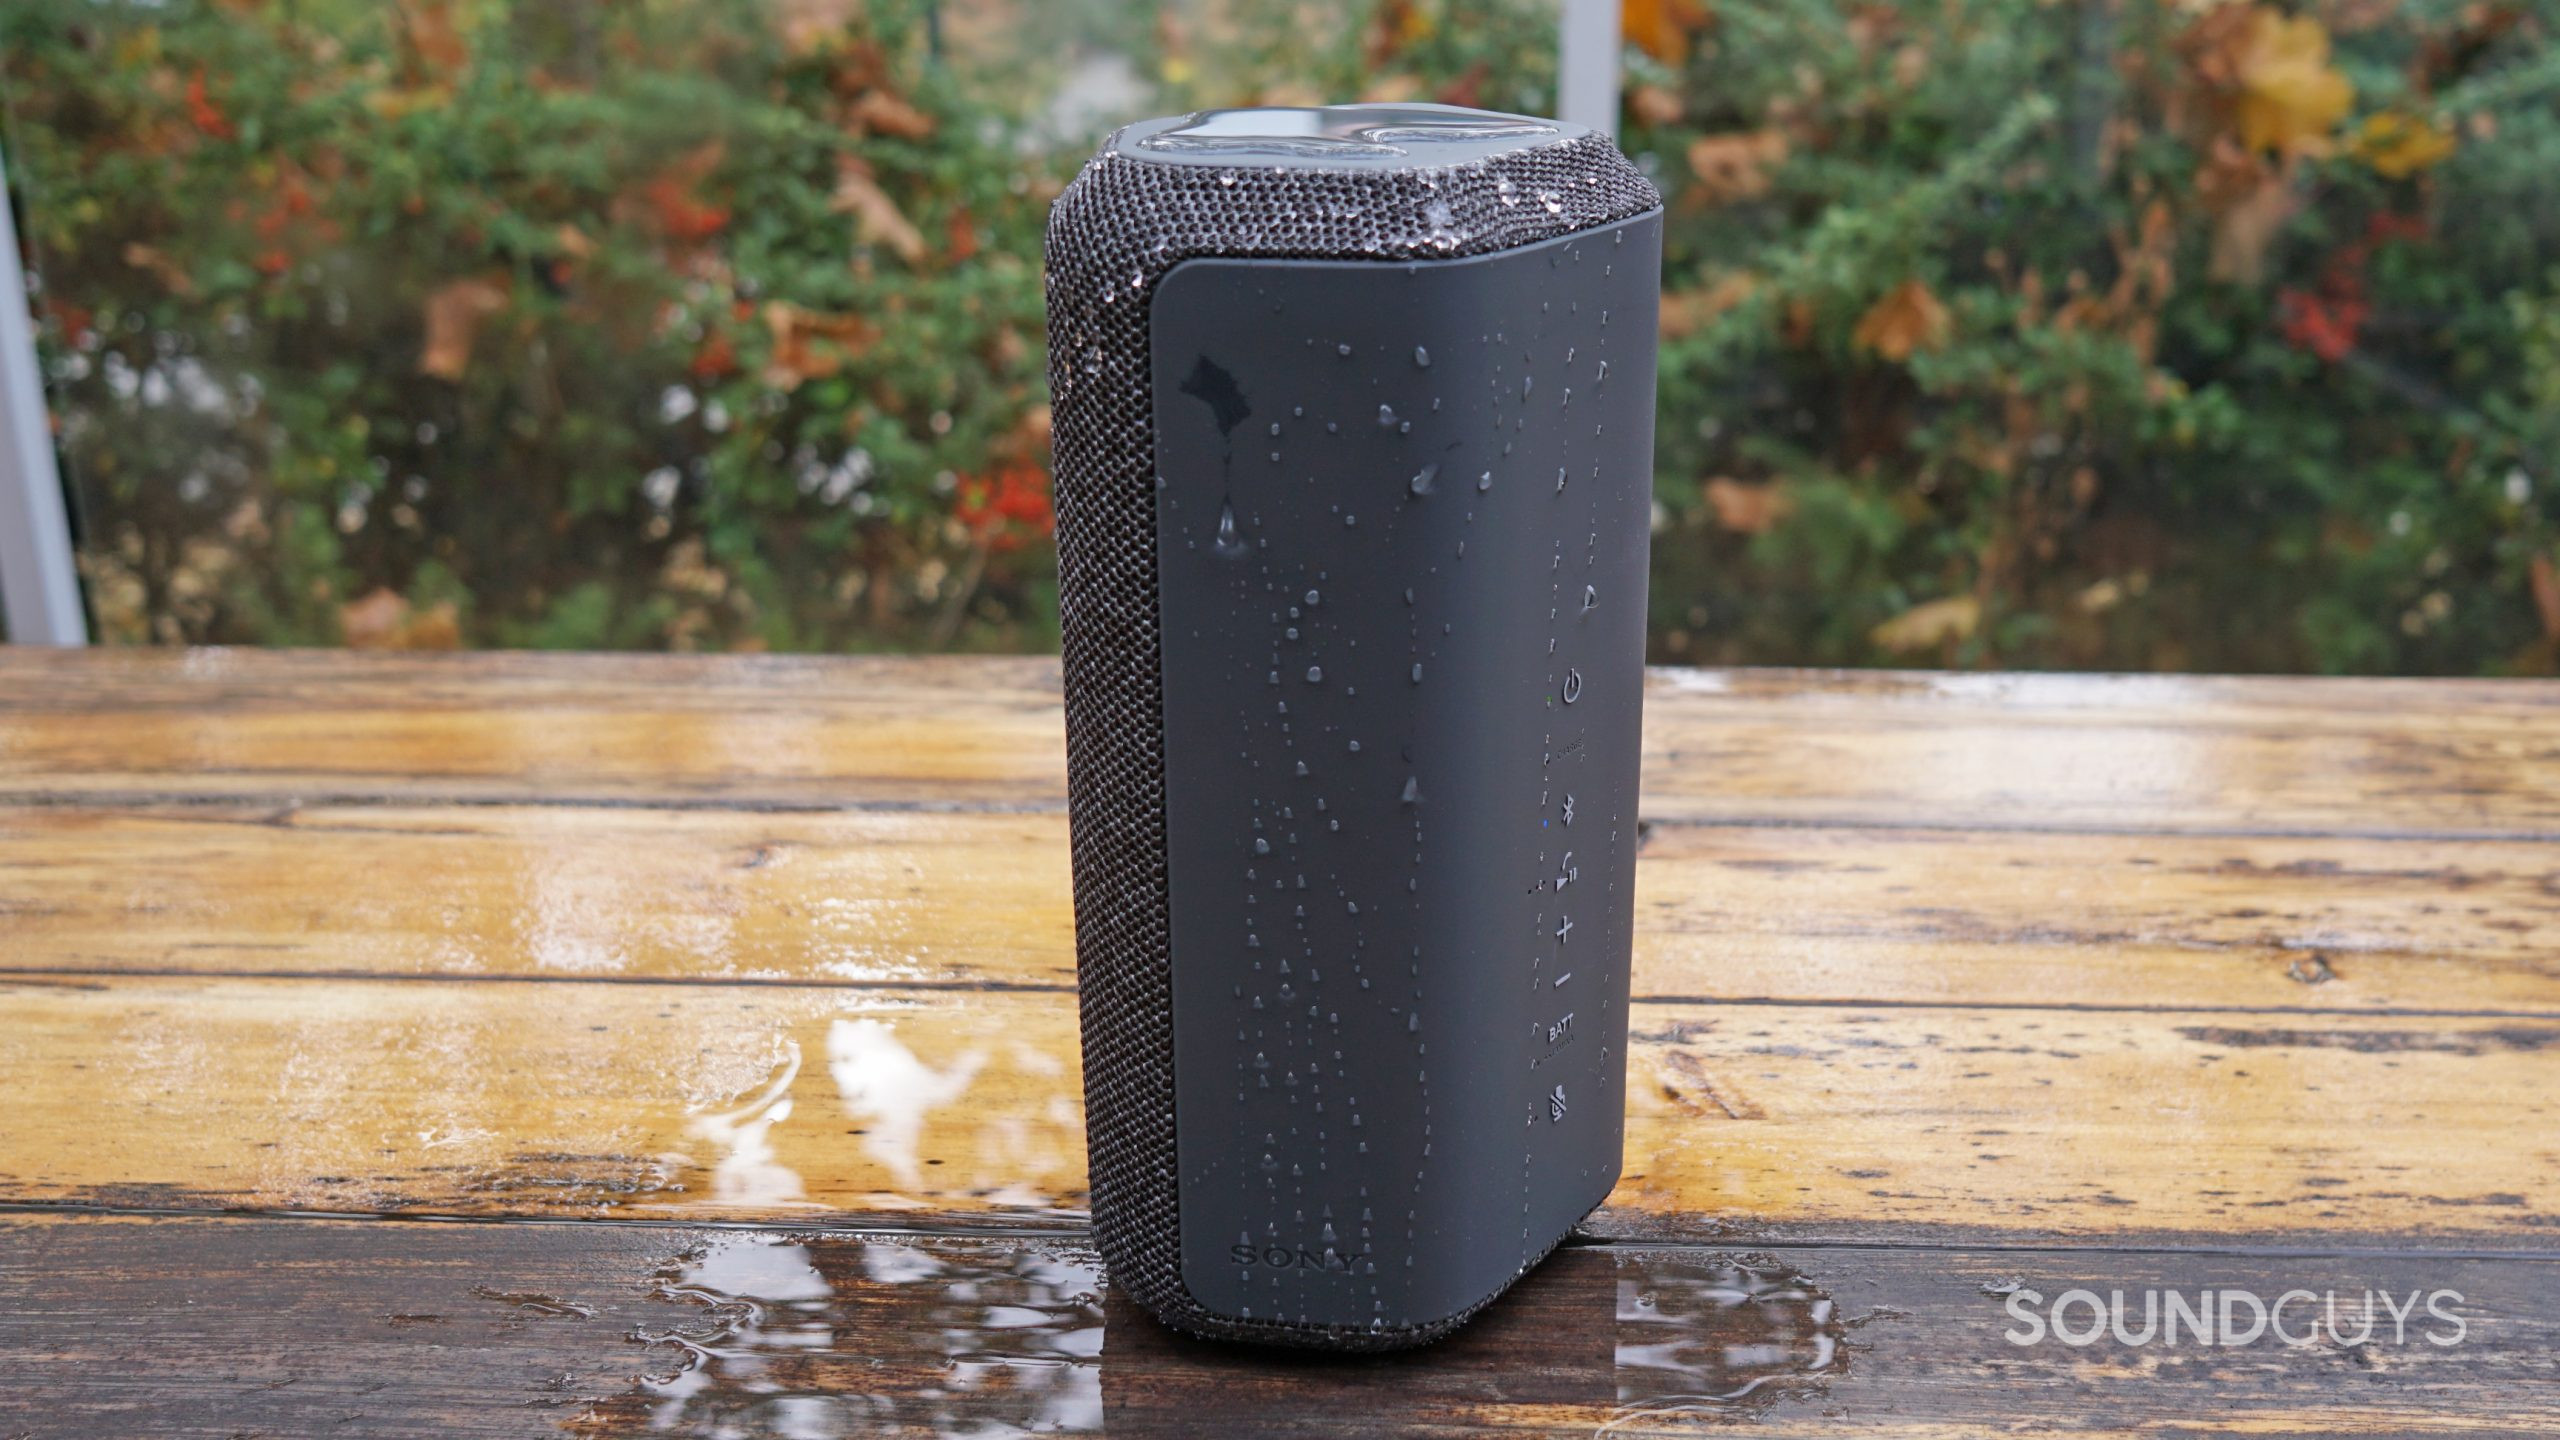 The Sony SRS-XE300 sits on a wooden table after being splashed with water.